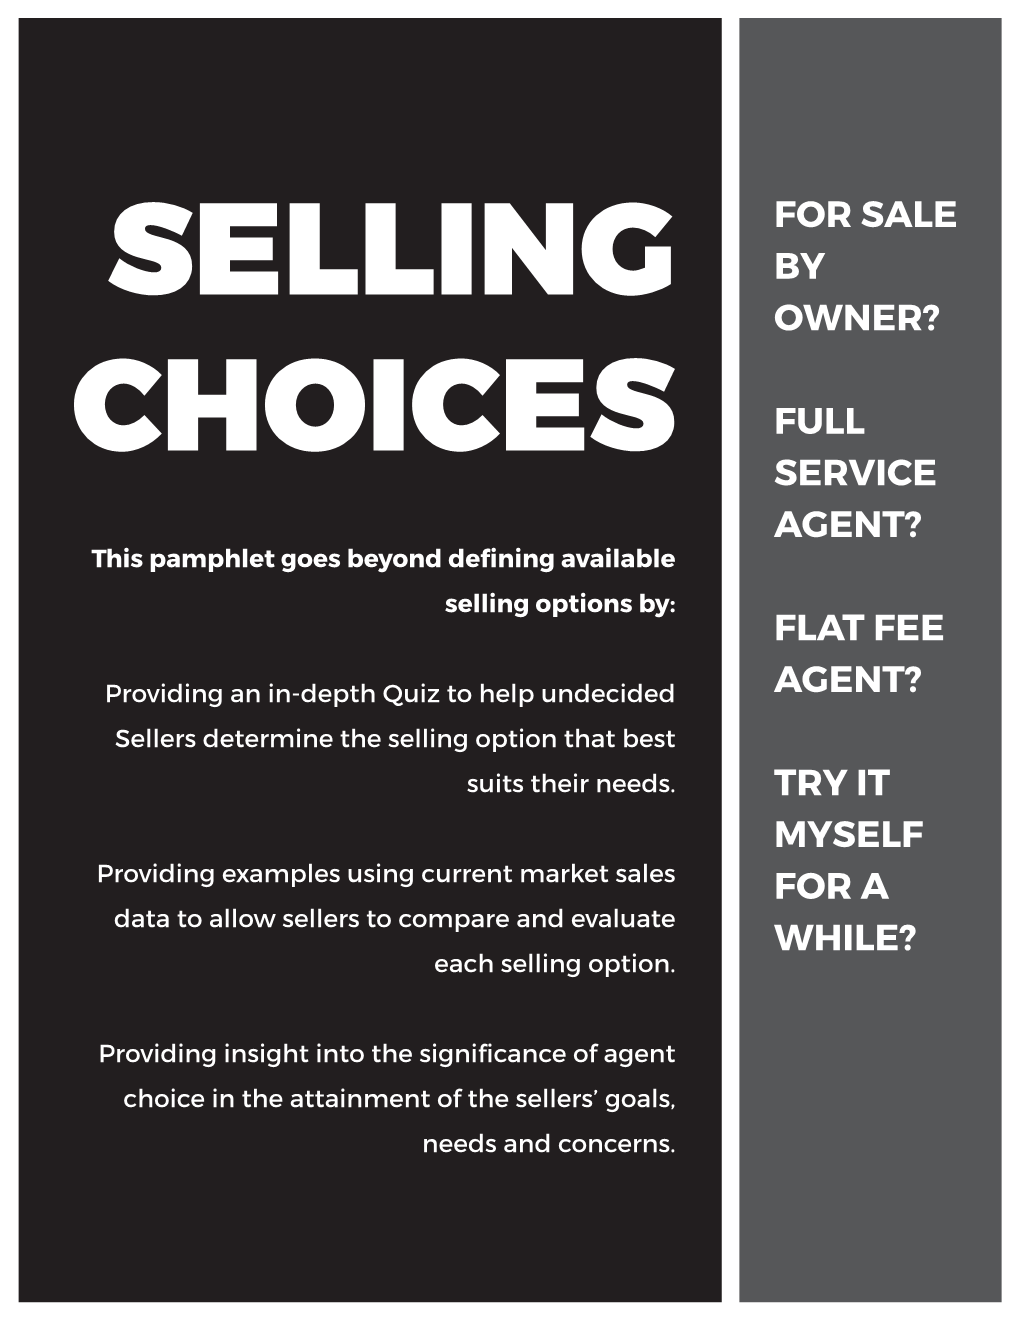 For Sale by Owner? Full Service Agent? Flat Fee Agent? Try It Myself for a While?